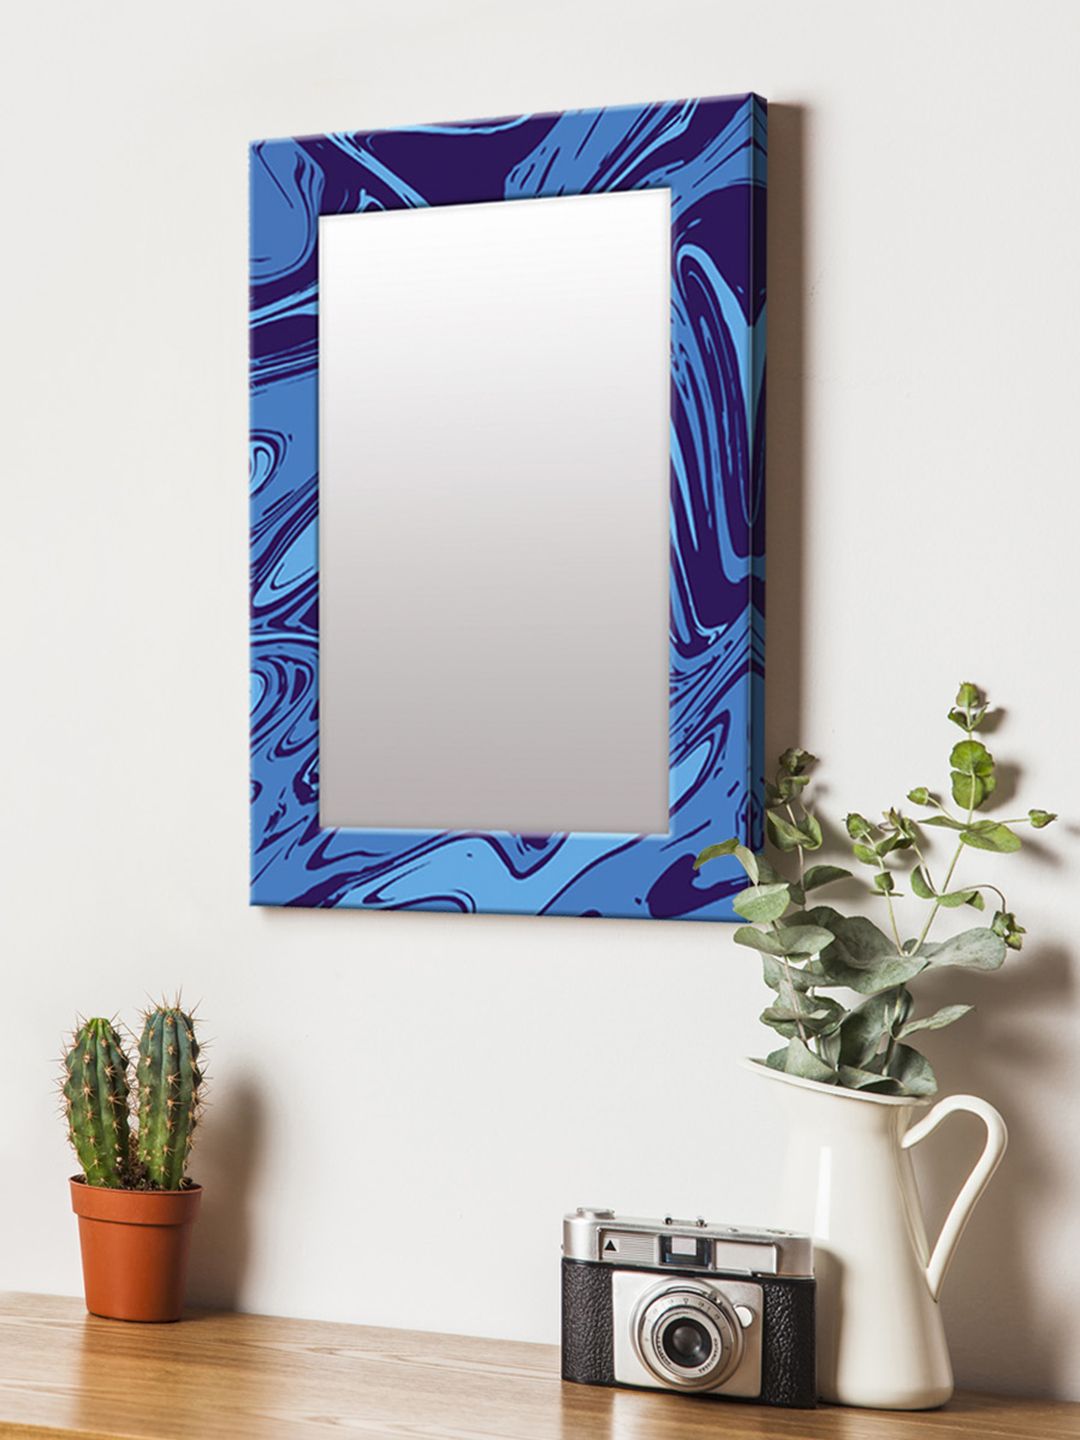 999Store Blue Printed MDF Wall Mirror Price in India